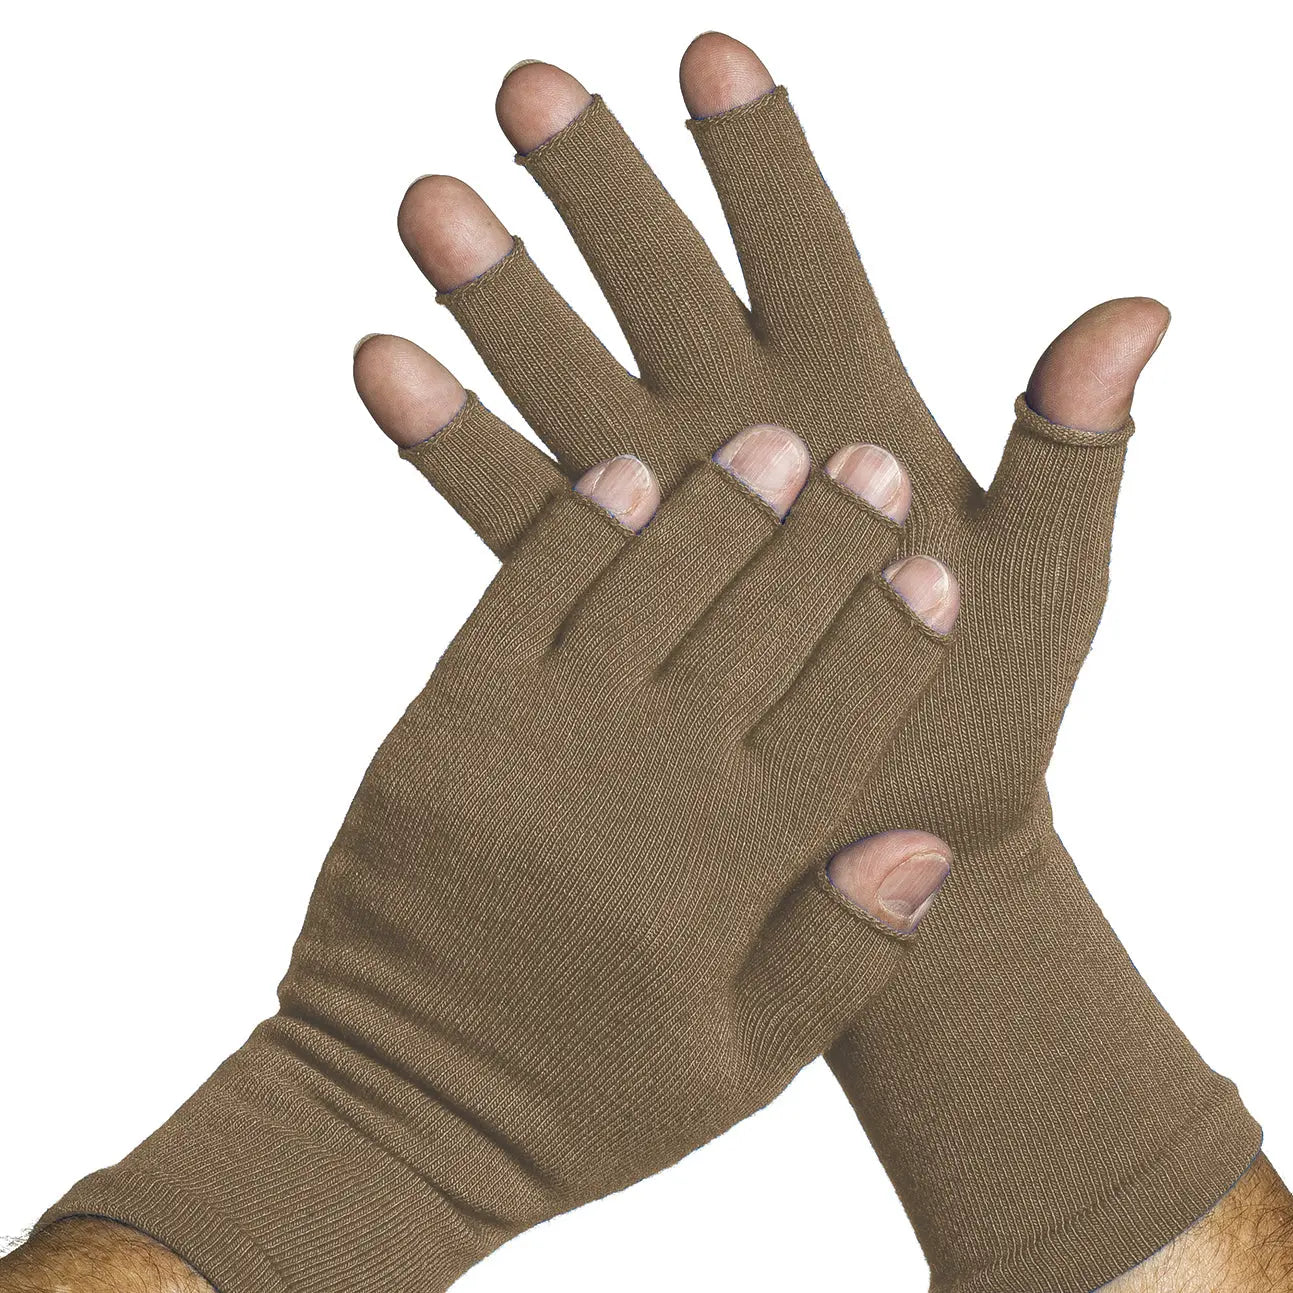 3/4 Fingerless Gloves - Keep hands warm with Raynauds (pair) Limbkeepers